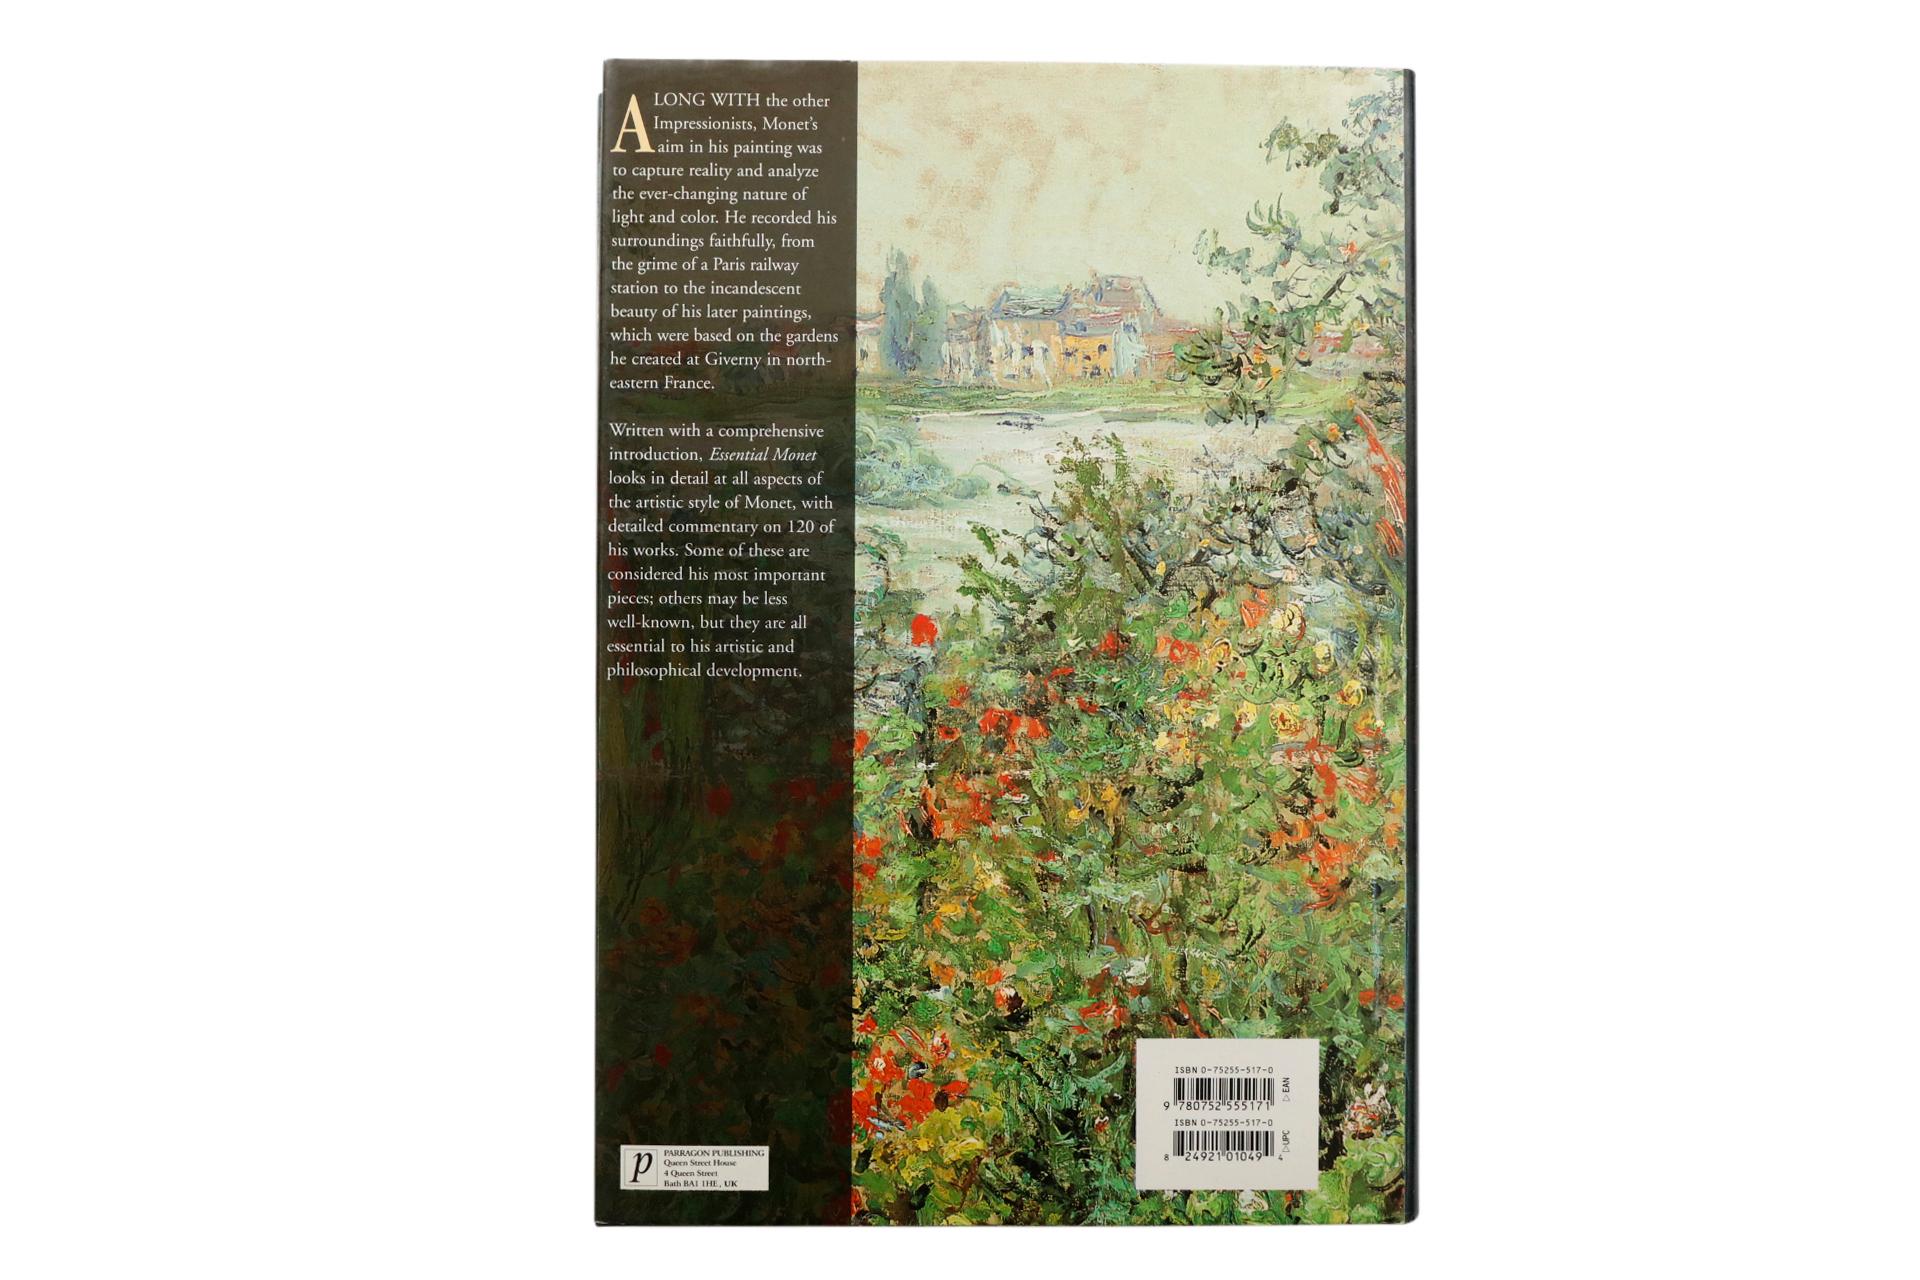 Essential Monet by Vanessa Potts. Hardcover book with dustjacket, published in 2003 by Parragon Publishing of Bath, England. 256 pages, illustrated.